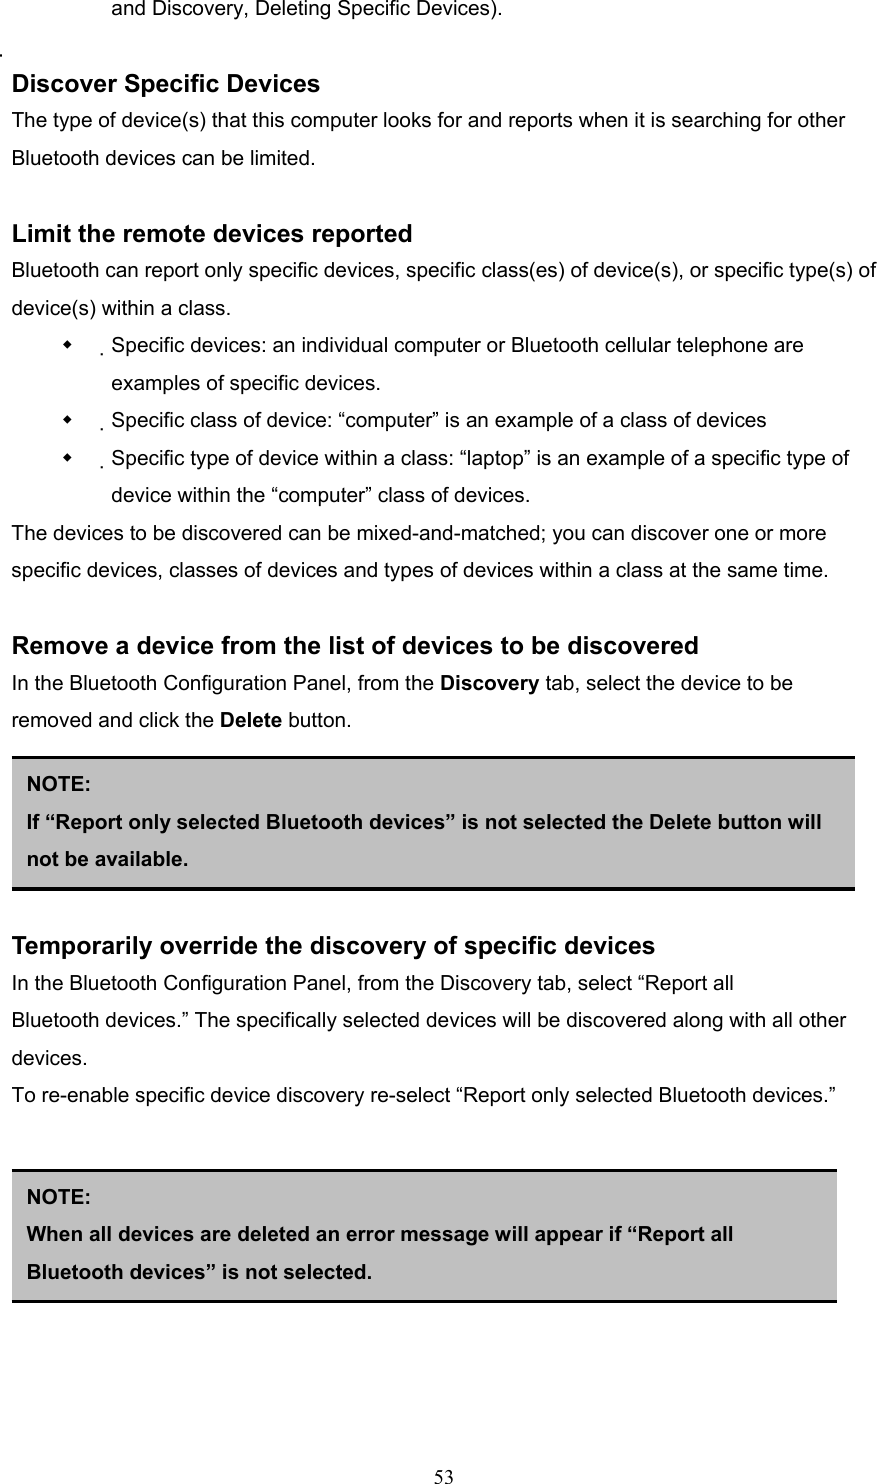  53 and Discovery, Deleting Specific Devices).  Discover Specific Devices The type of device(s) that this computer looks for and reports when it is searching for other Bluetooth devices can be limited.  Limit the remote devices reported Bluetooth can report only specific devices, specific class(es) of device(s), or specific type(s) of device(s) within a class.   Specific devices: an individual computer or Bluetooth cellular telephone are examples of specific devices.   Specific class of device: “computer” is an example of a class of devices   Specific type of device within a class: “laptop” is an example of a specific type of device within the “computer” class of devices. The devices to be discovered can be mixed-and-matched; you can discover one or more specific devices, classes of devices and types of devices within a class at the same time.  Remove a device from the list of devices to be discovered In the Bluetooth Configuration Panel, from the Discovery tab, select the device to be removed and click the Delete button.      Temporarily override the discovery of specific devices In the Bluetooth Configuration Panel, from the Discovery tab, select “Report all Bluetooth devices.” The specifically selected devices will be discovered along with all other devices. To re-enable specific device discovery re-select “Report only selected Bluetooth devices.”        NOTE: If “Report only selected Bluetooth devices” is not selected the Delete button will not be available. NOTE:  When all devices are deleted an error message will appear if “Report all Bluetooth devices” is not selected. 